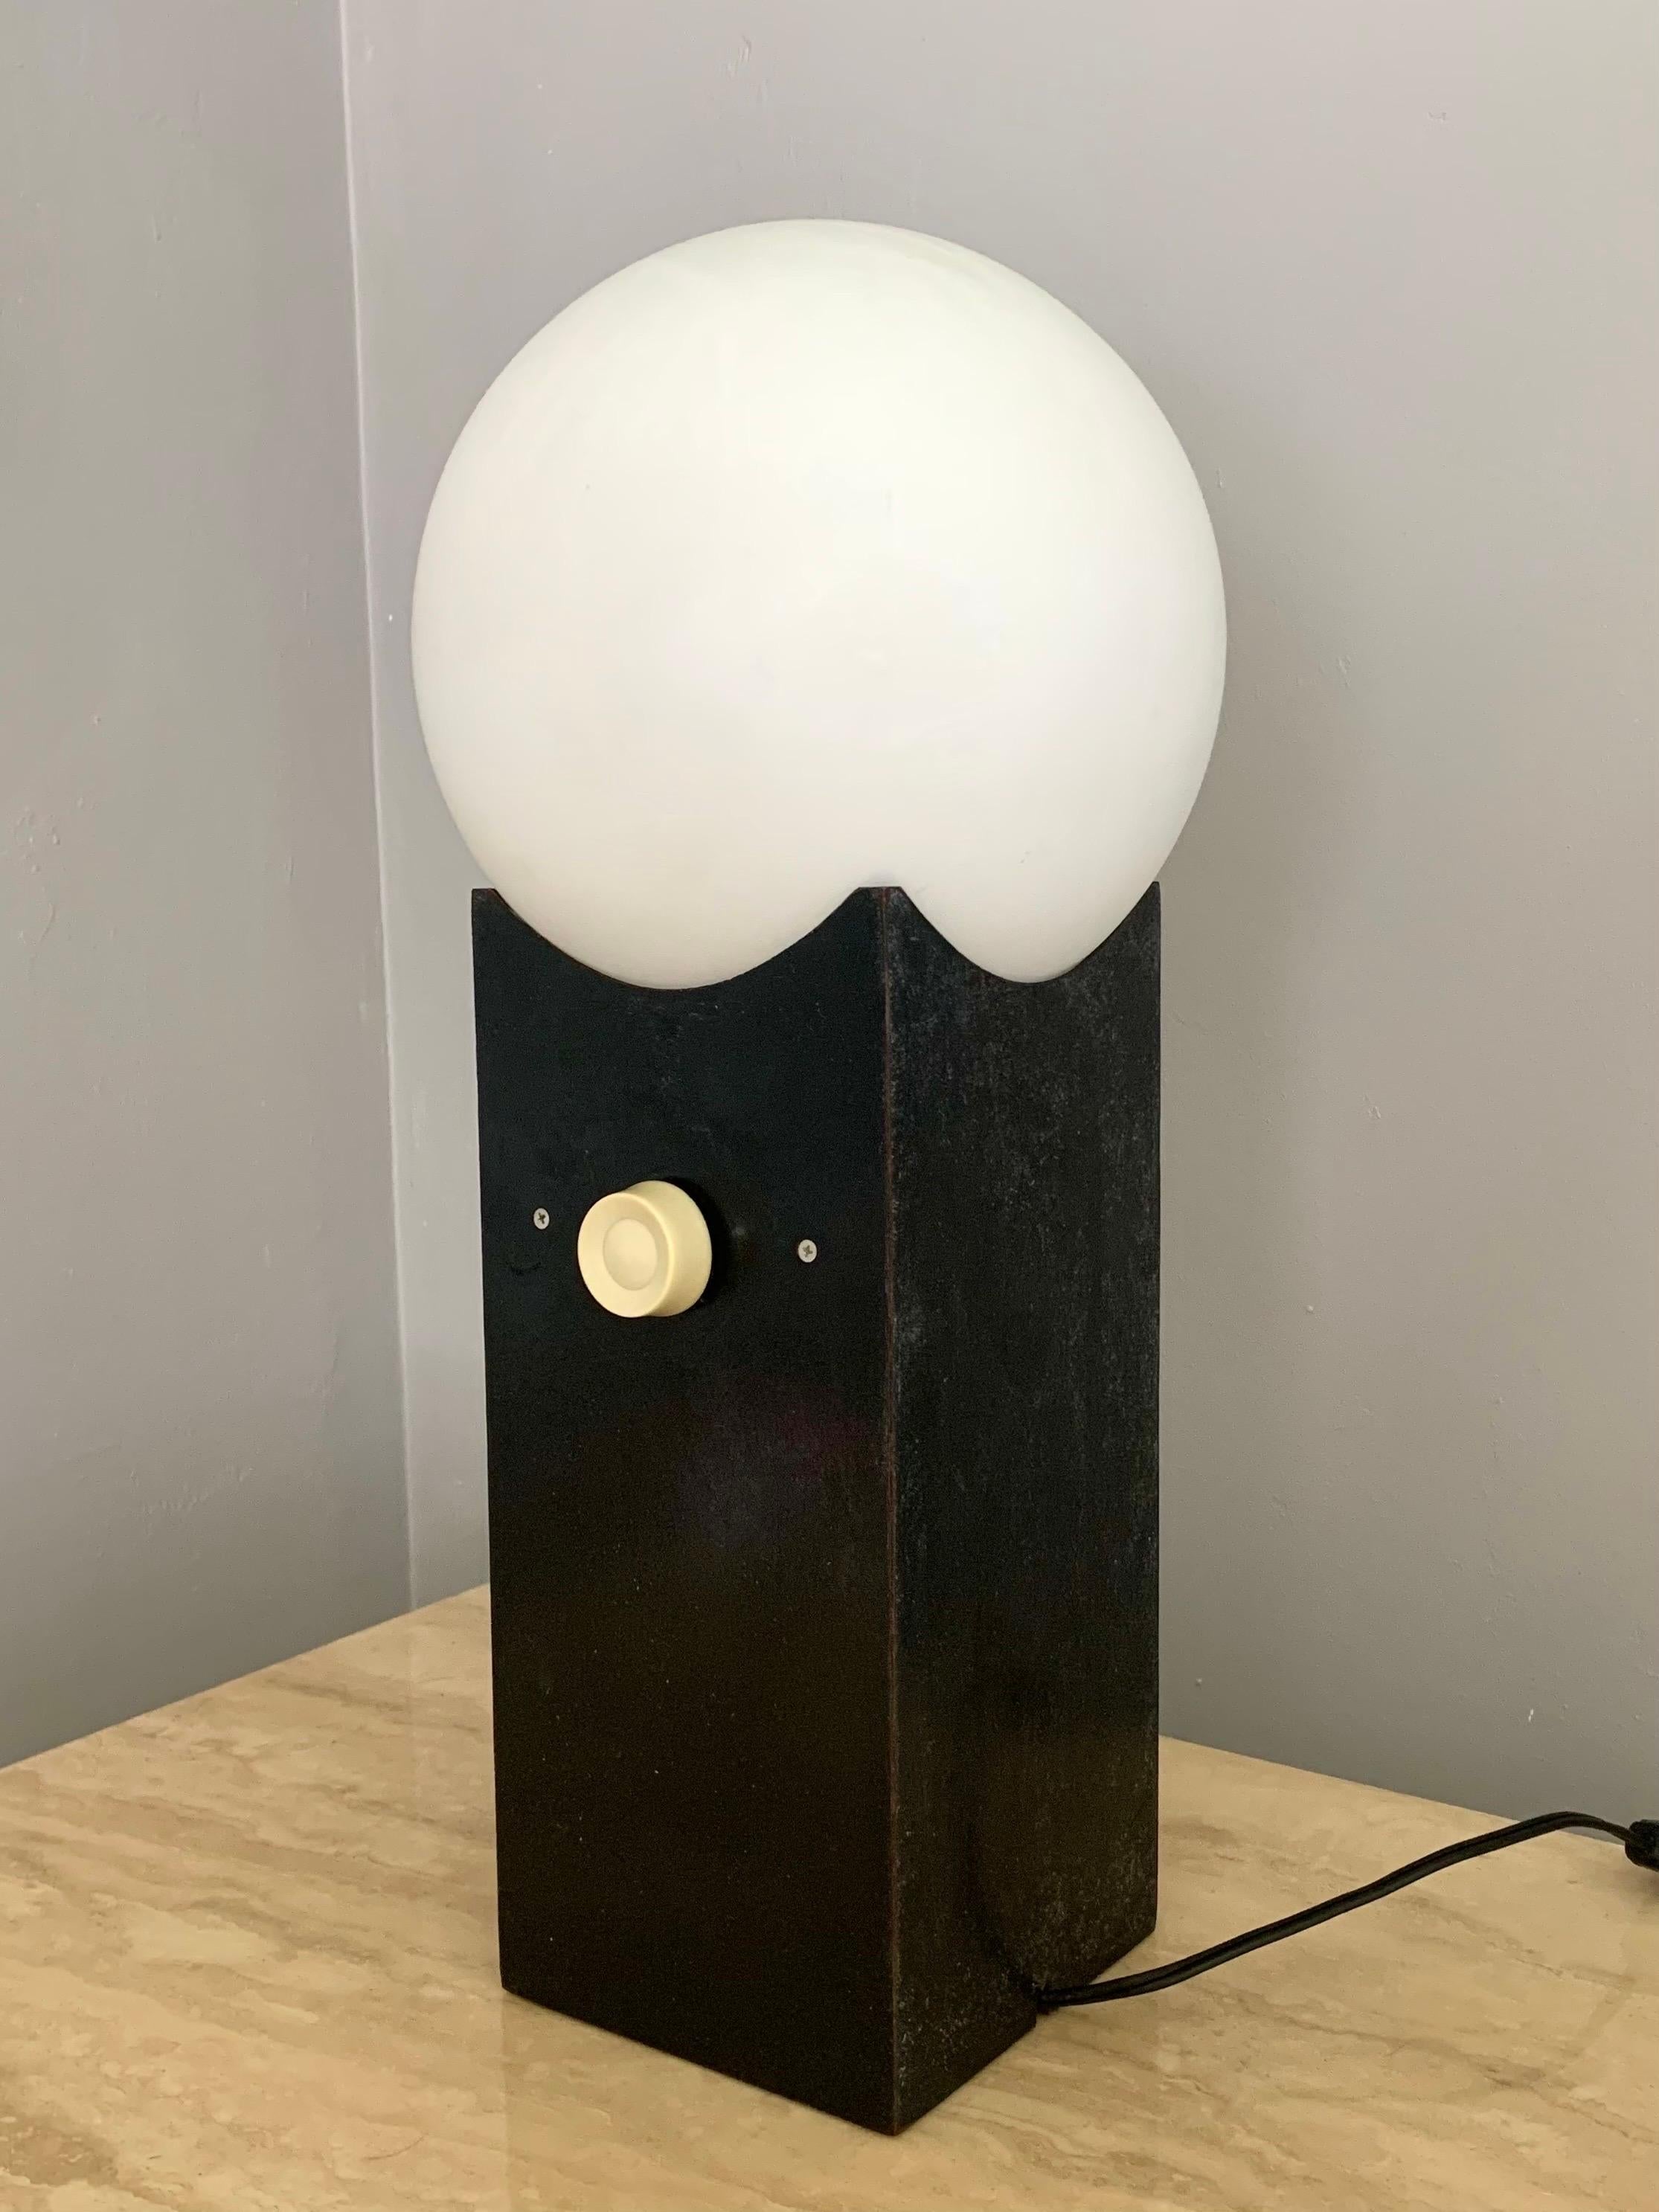 Simple Mid-Century Modern globe lamp. Set on a dimmer switch. Works great. Base made of wood that has a black coating. Great patina and wear patterns. Great minimalist design.

Lamp is 17.5